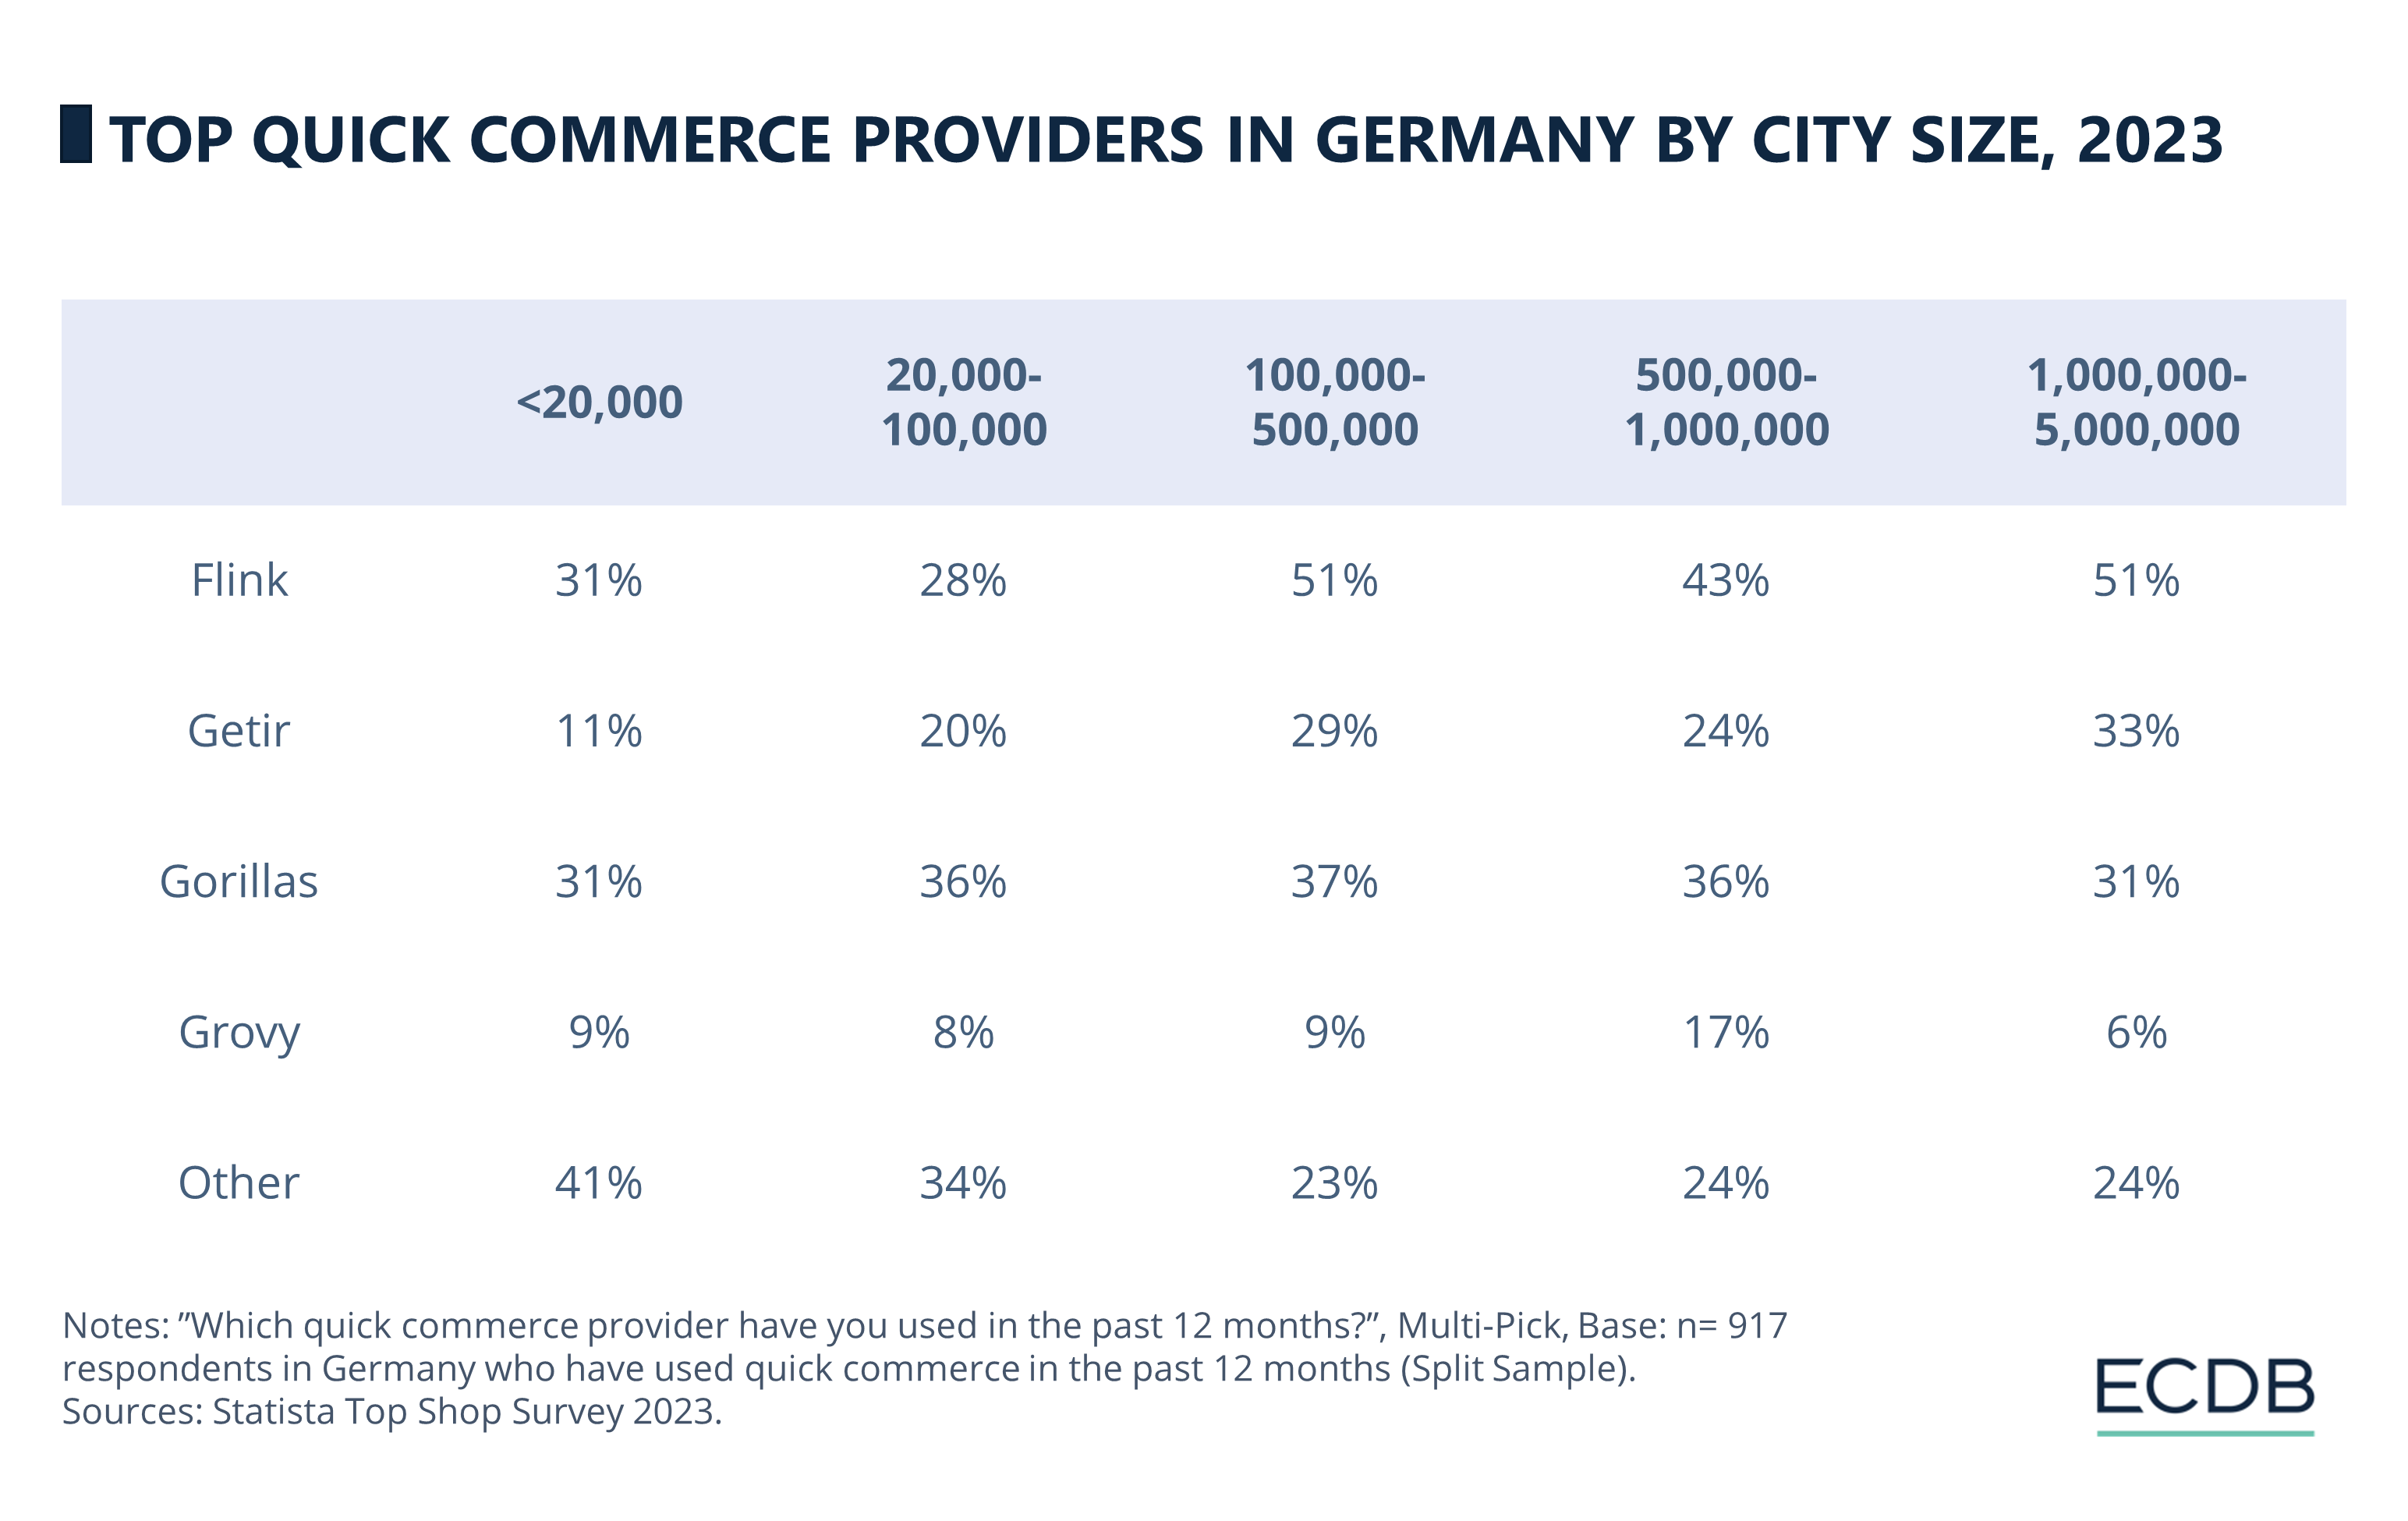 Top Quick Commerce Providers in Germany by City Size, 2023